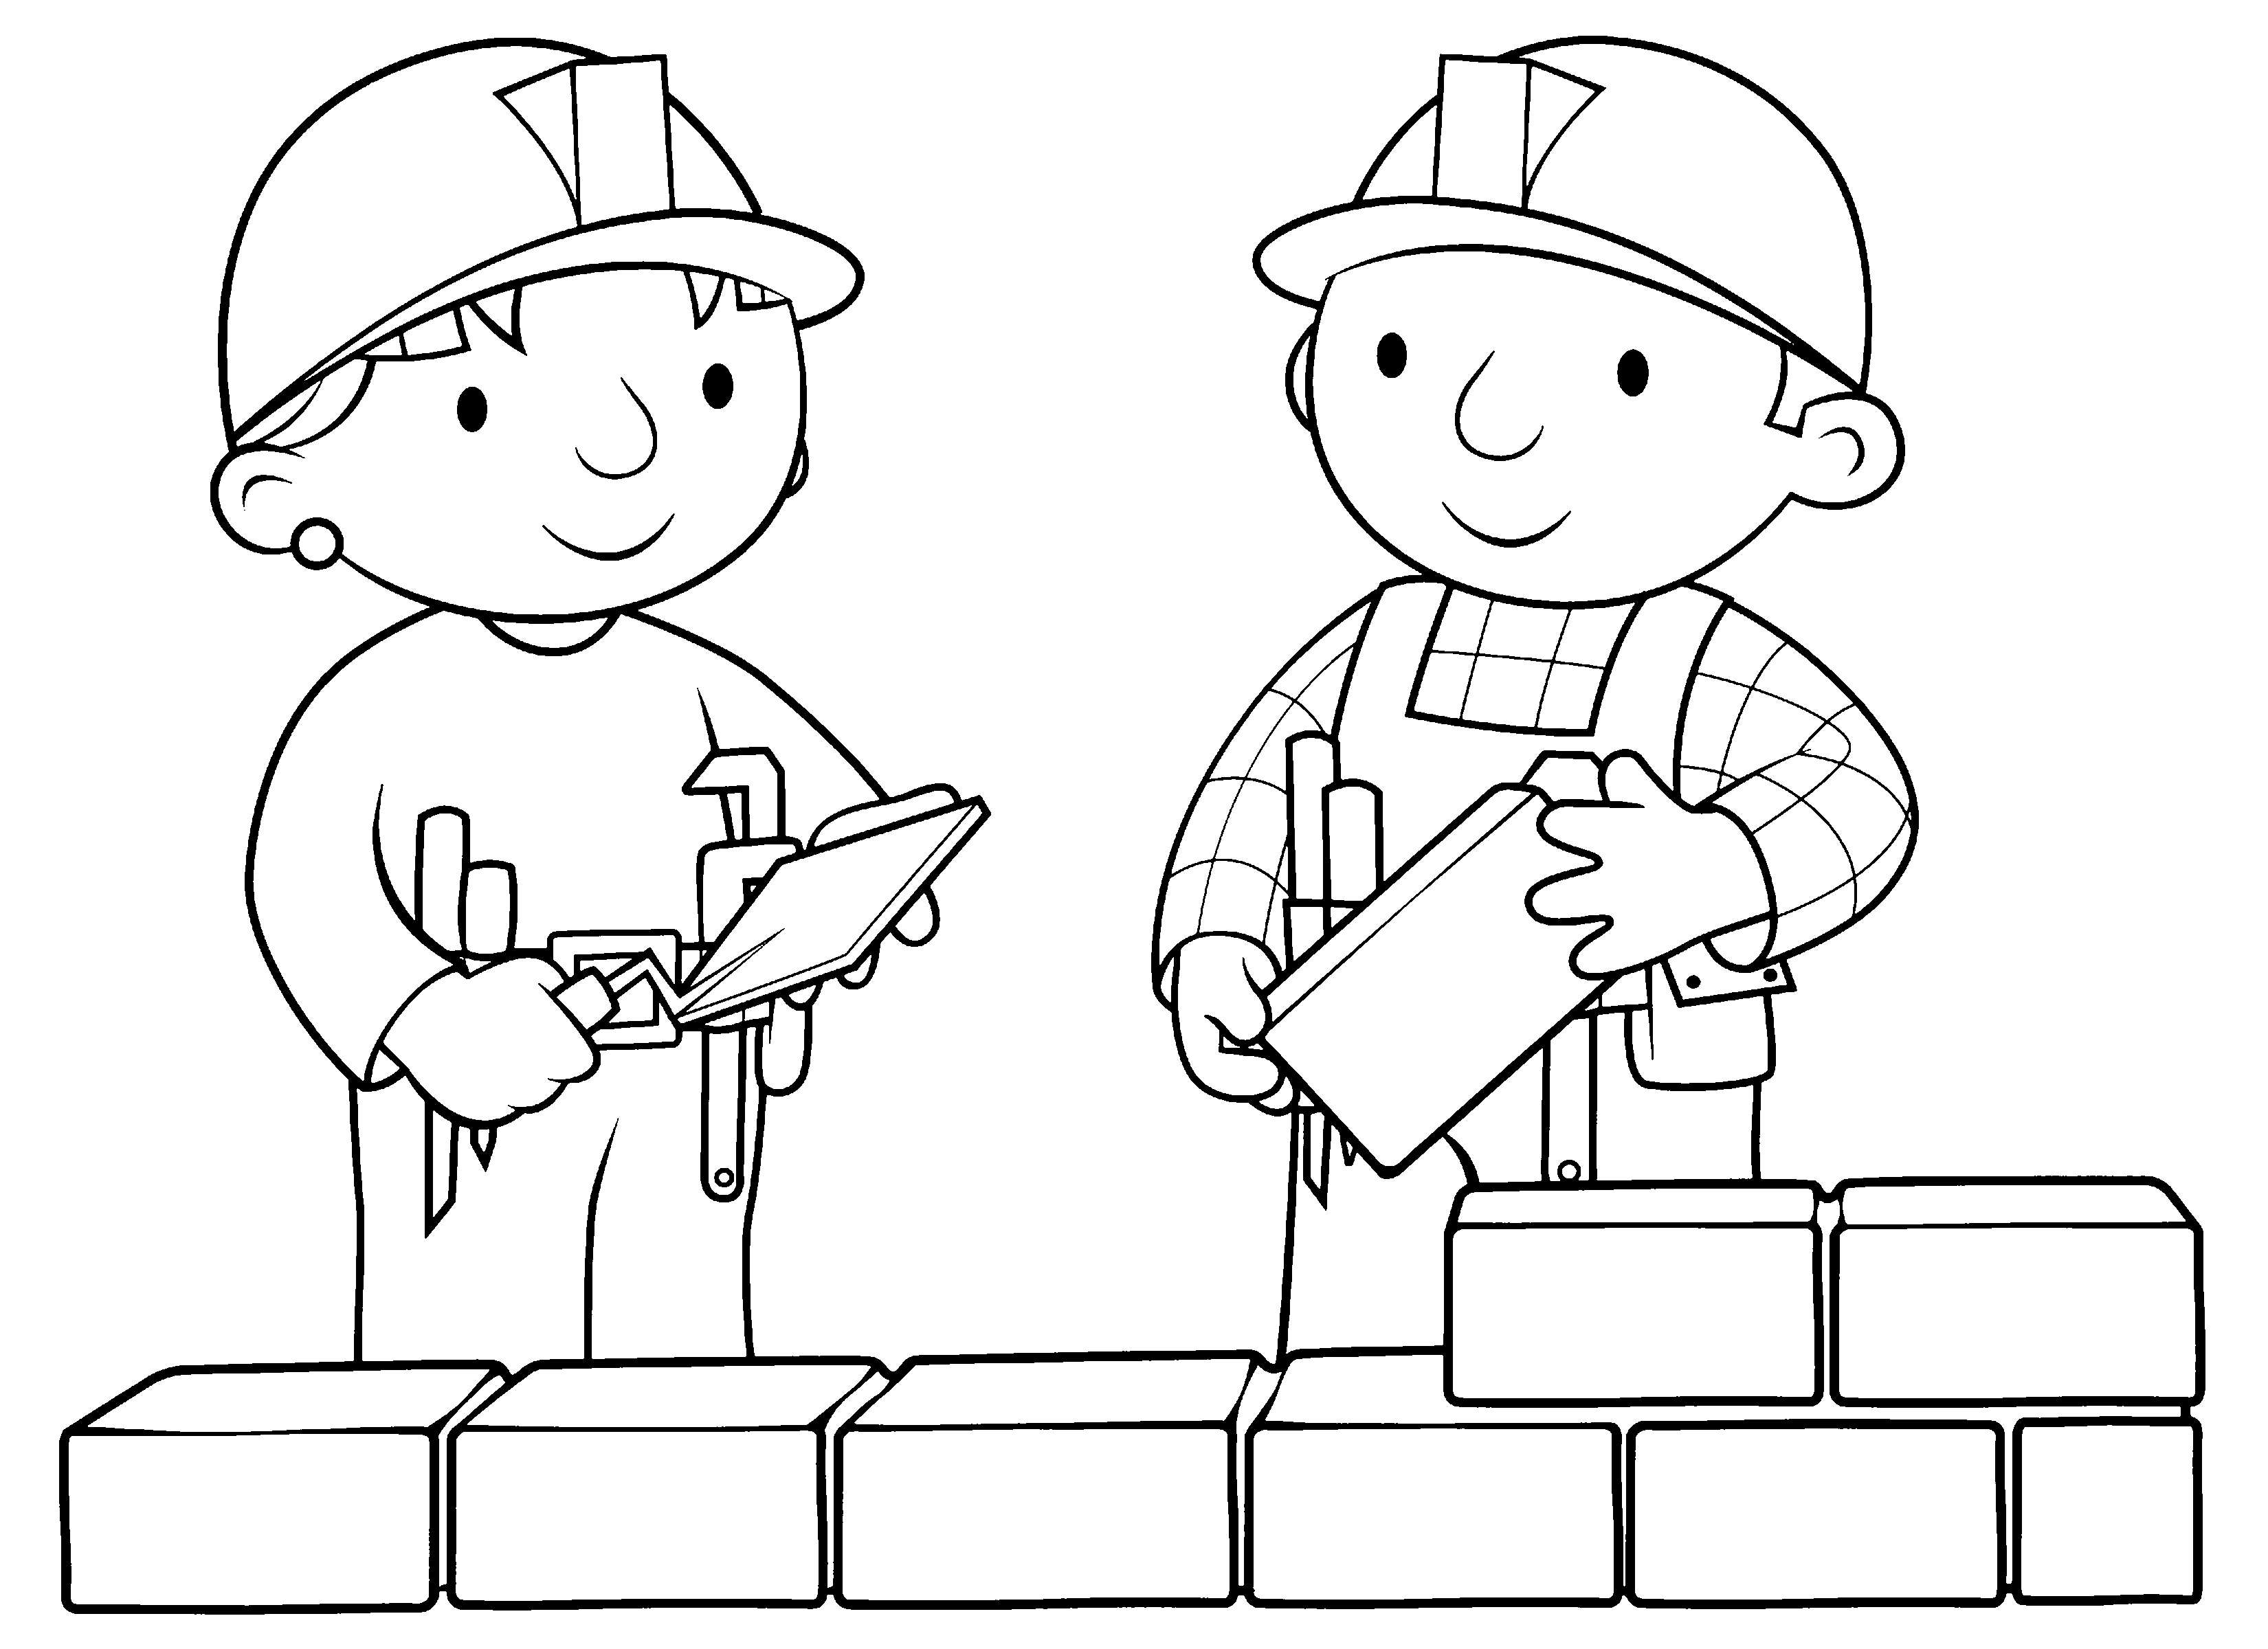 Bob The Builder Coloring Page - Coloring Home